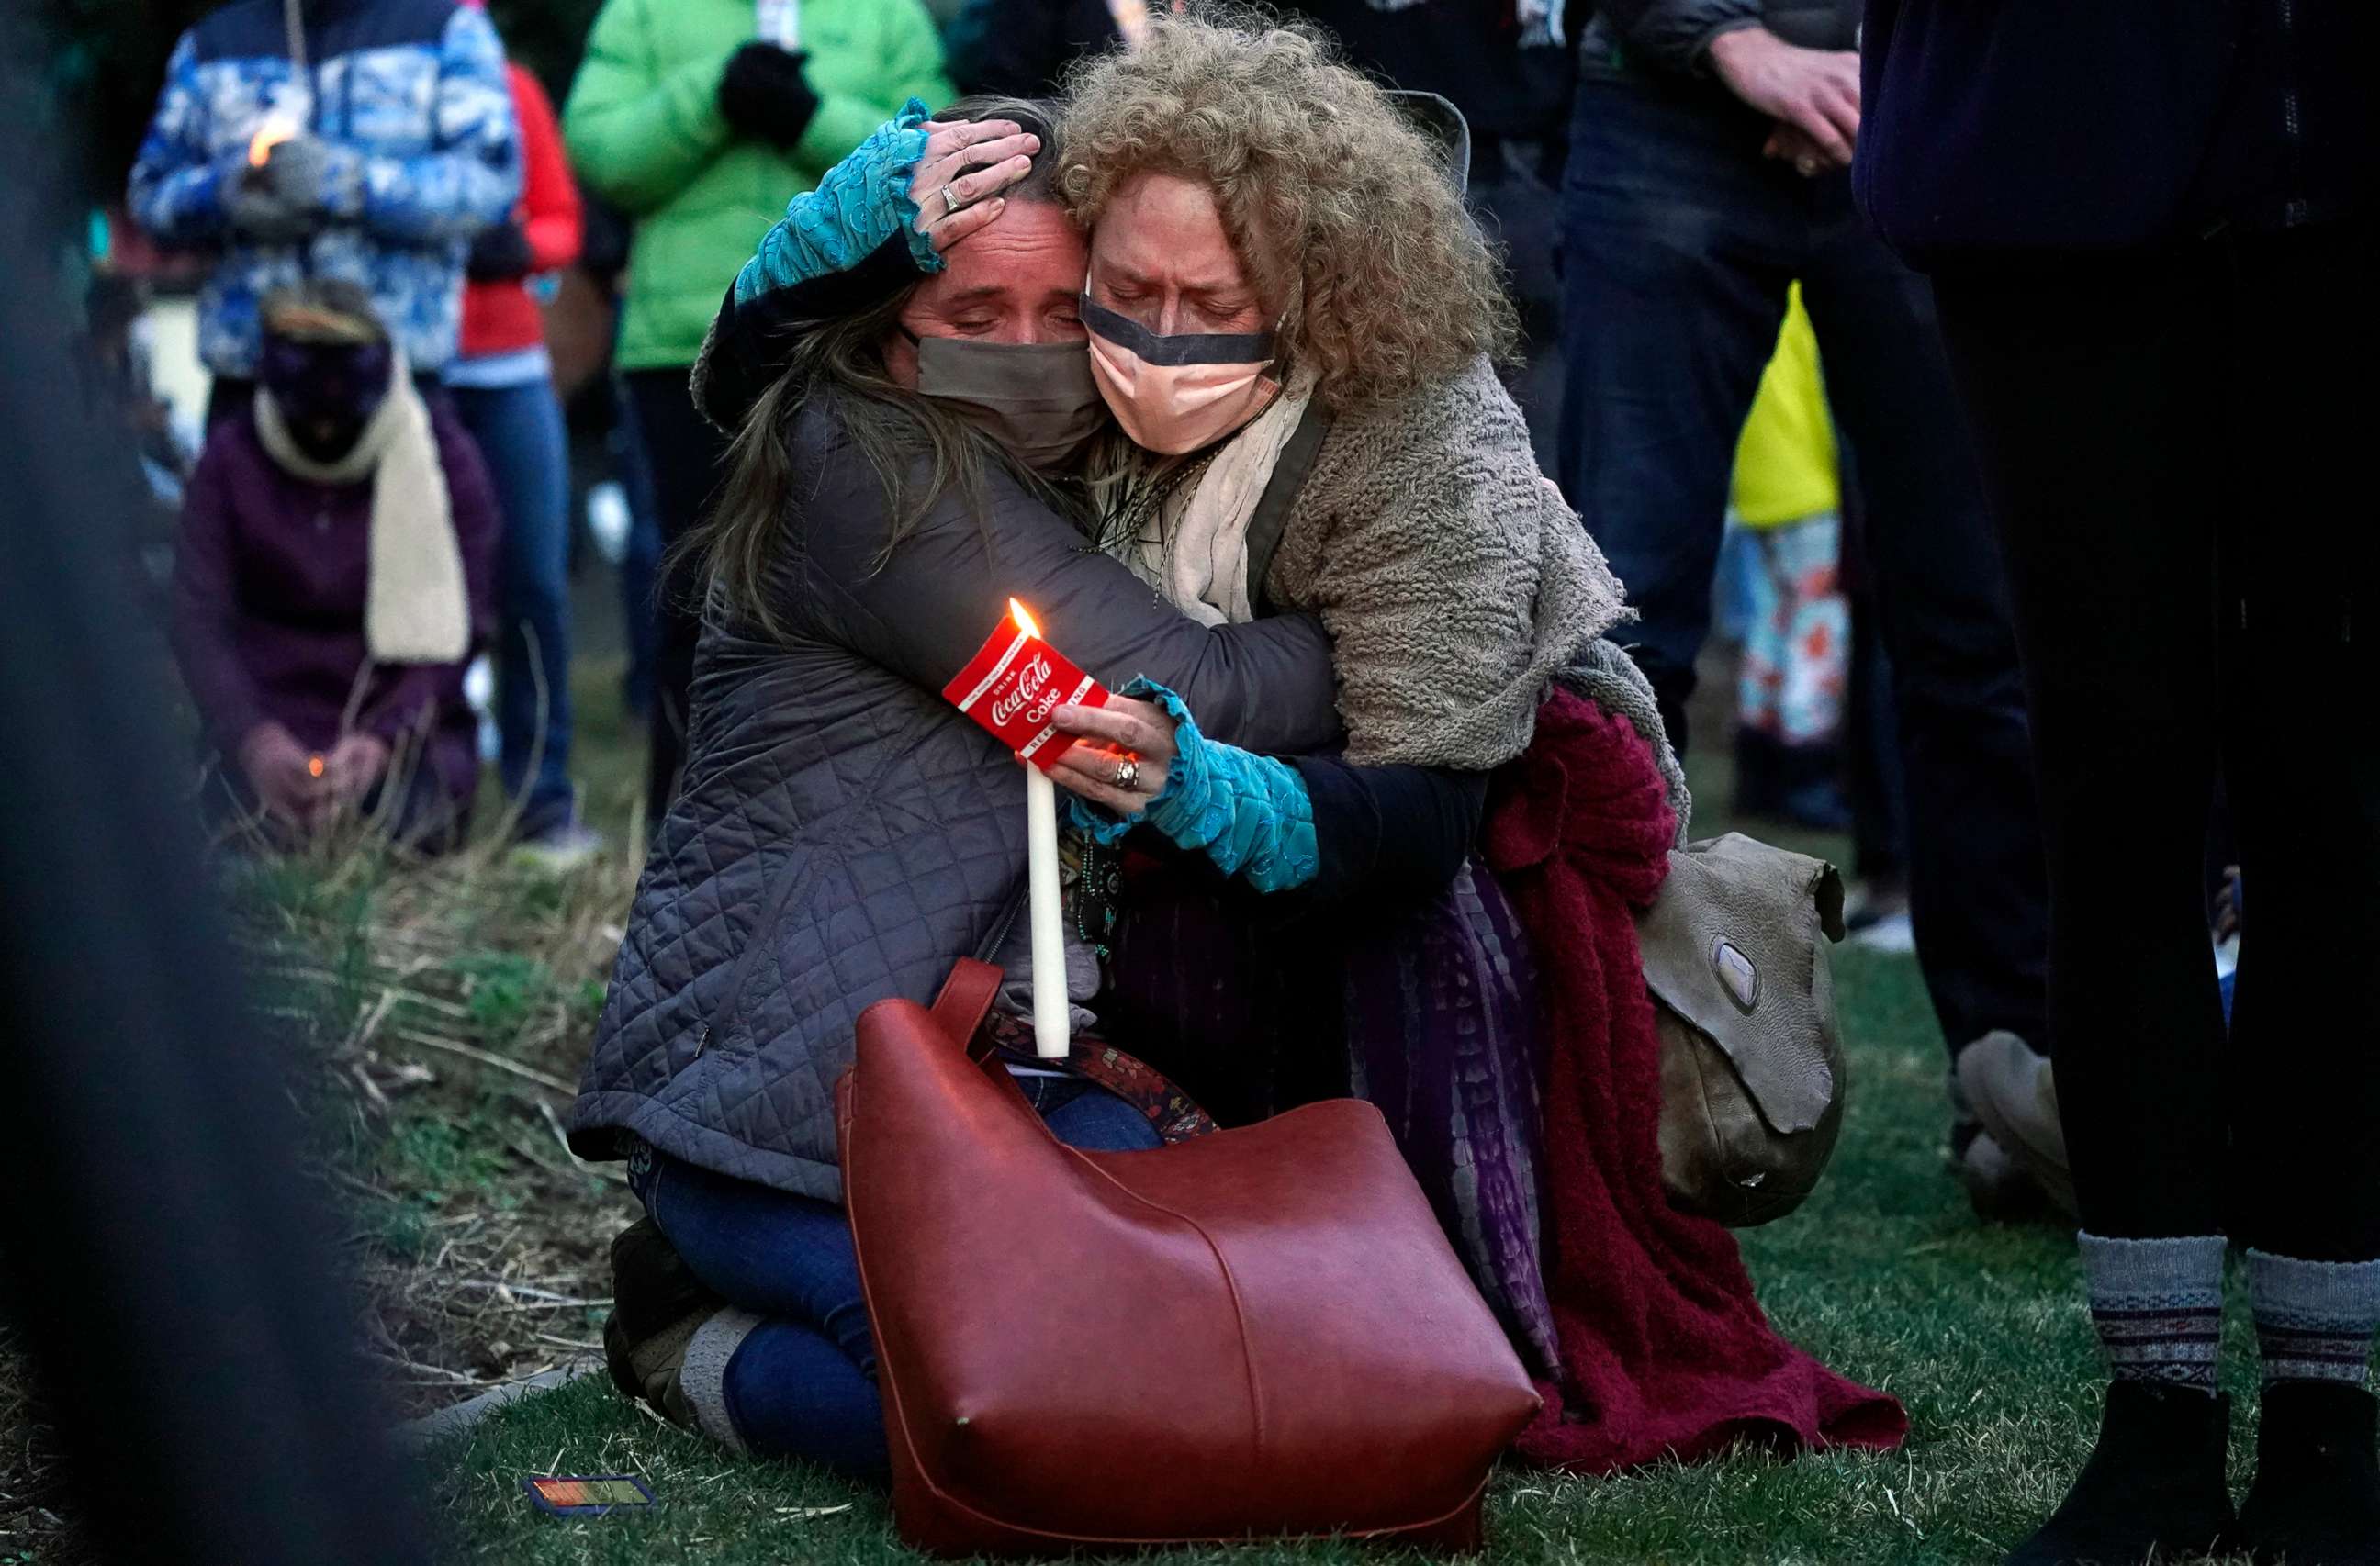 PHOTO: Mourners embrace at a vigil for the victims of a mass shooting at a grocery store earlier in the week, March 24, 2021, outside the courthouse in Boulder, Colo.